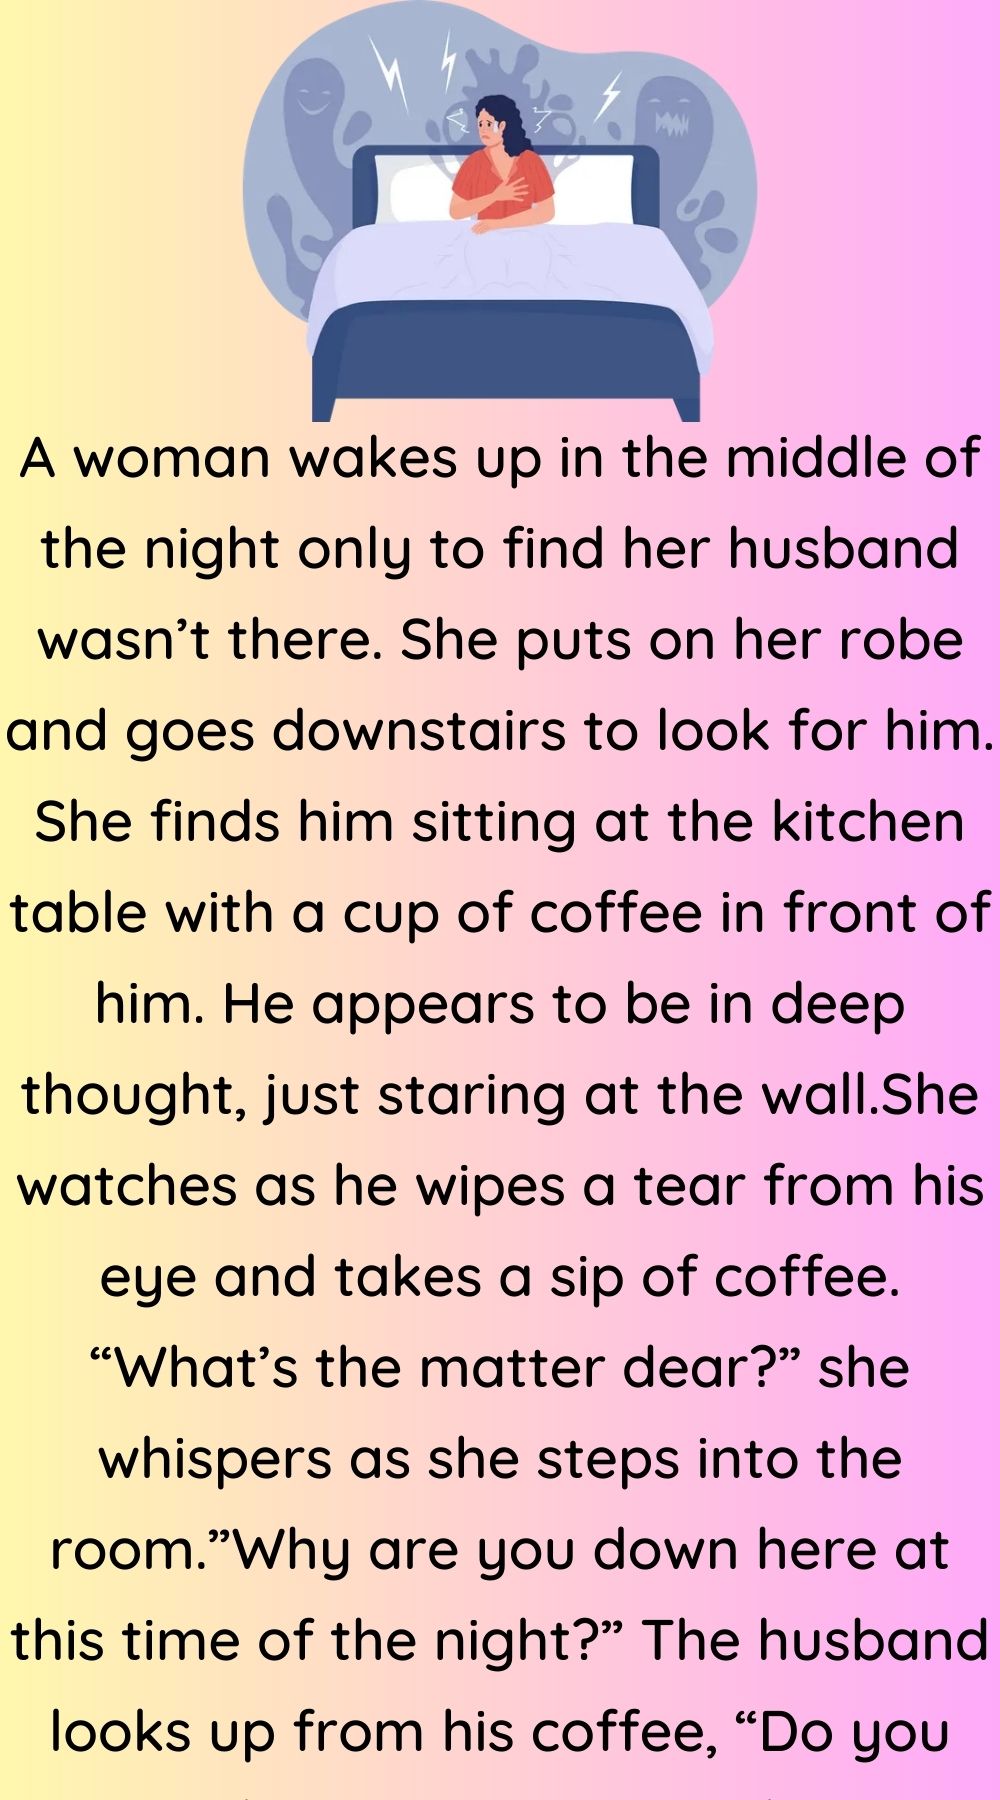 A woman wakes up in the middle of the night 